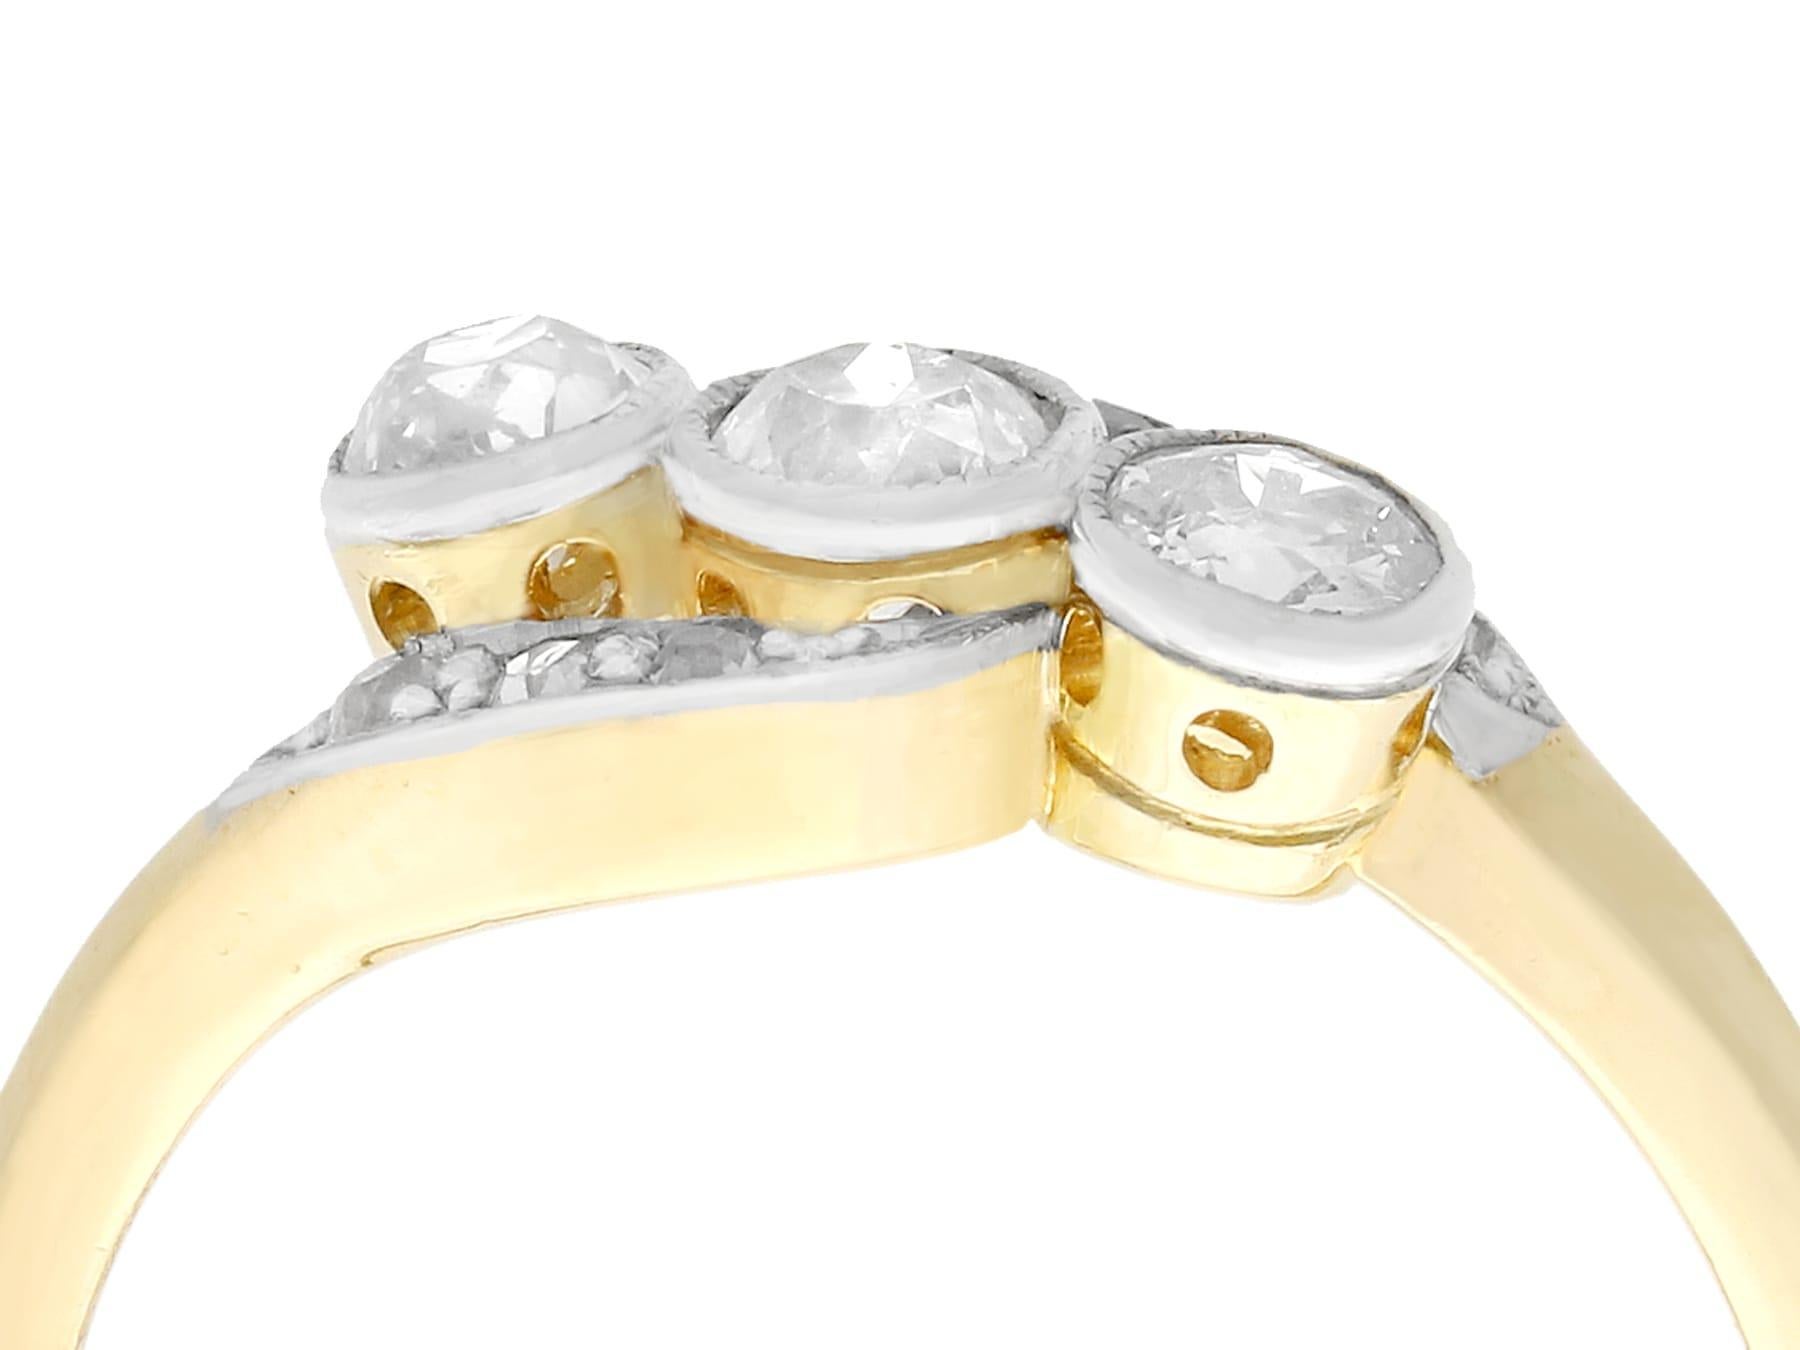 An impressive antique 1930s 0.57 carat diamond and 18 karat yellow gold, 18 karat white gold set twist style trilogy ring; part of our diverse antique estate jewelry collections.

This fine and impressive 1930s diamond ring has been crafted in 18k